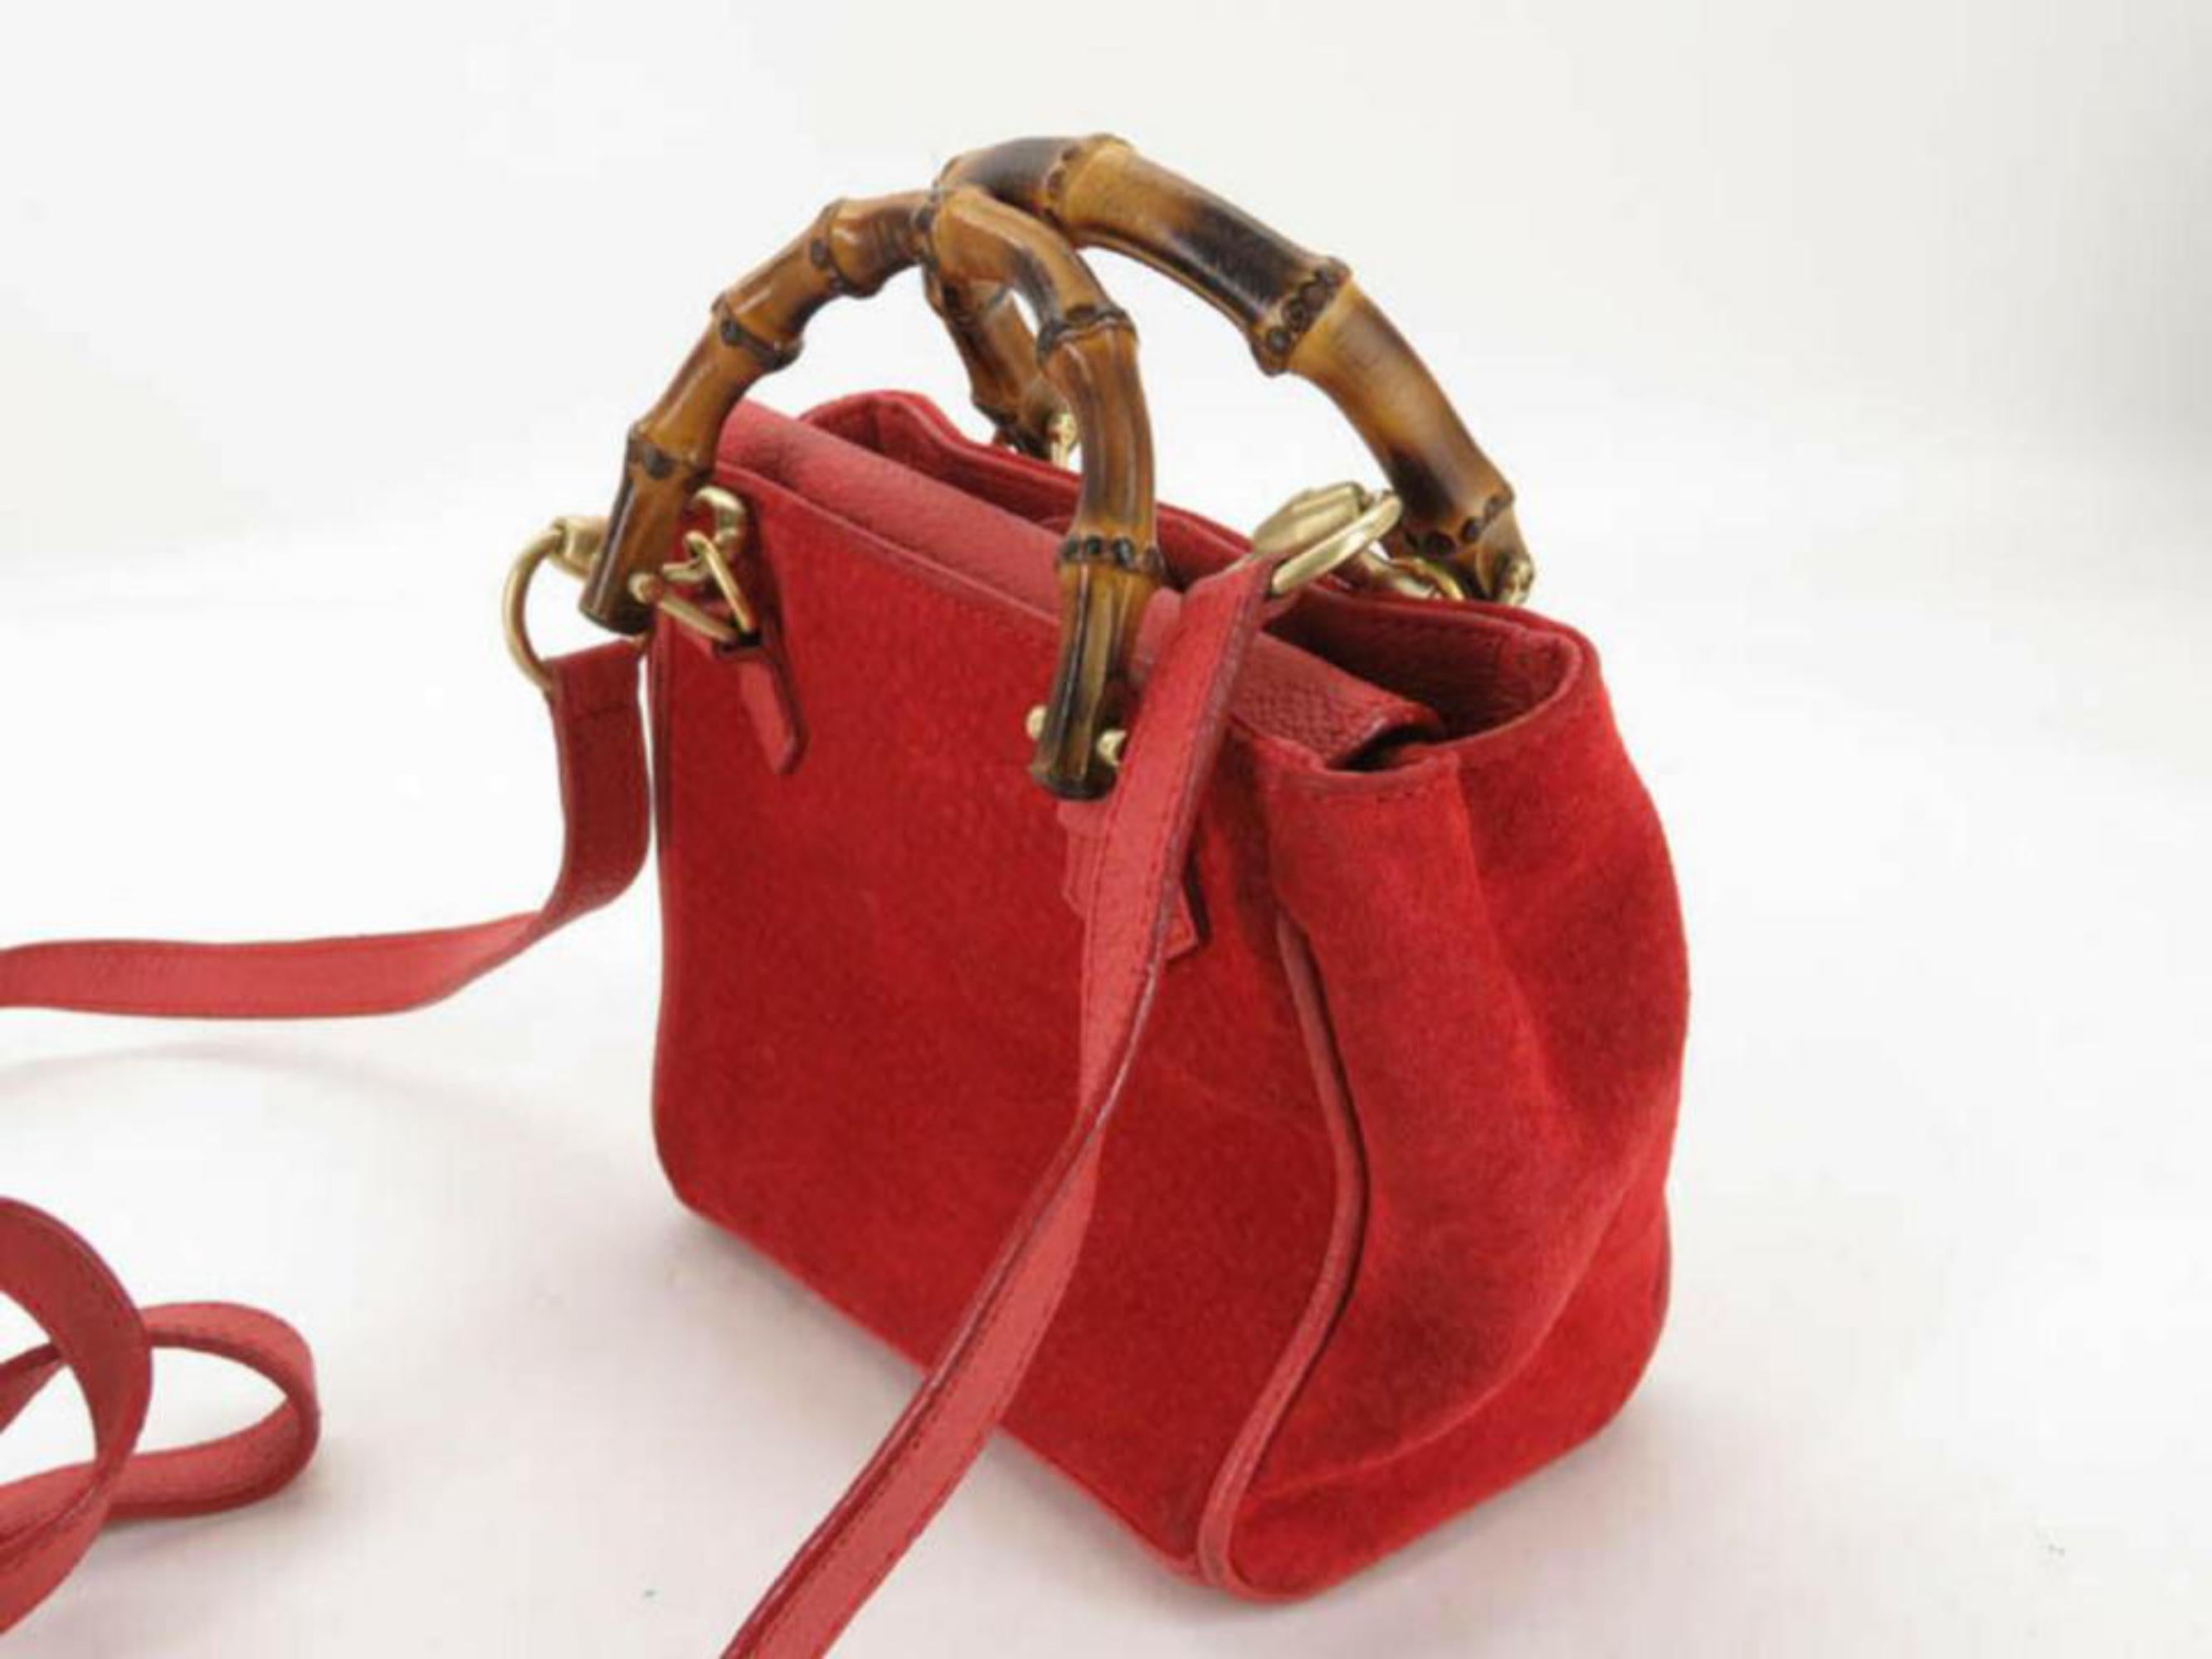 Material SUEDE x LEATHER
Color RED
Approximate SizeWx14cm(5.5inch) Hx13cm(5.1inch) Dx7cm(2.8inch)
Handle Drop / Strap DropHanle Drop : 4cm(1.6inch) / Strap Lengh : 60cm(23.6inch)
Outside Pocket2pokets
Inside Pocket1poket
Country of Manufacture